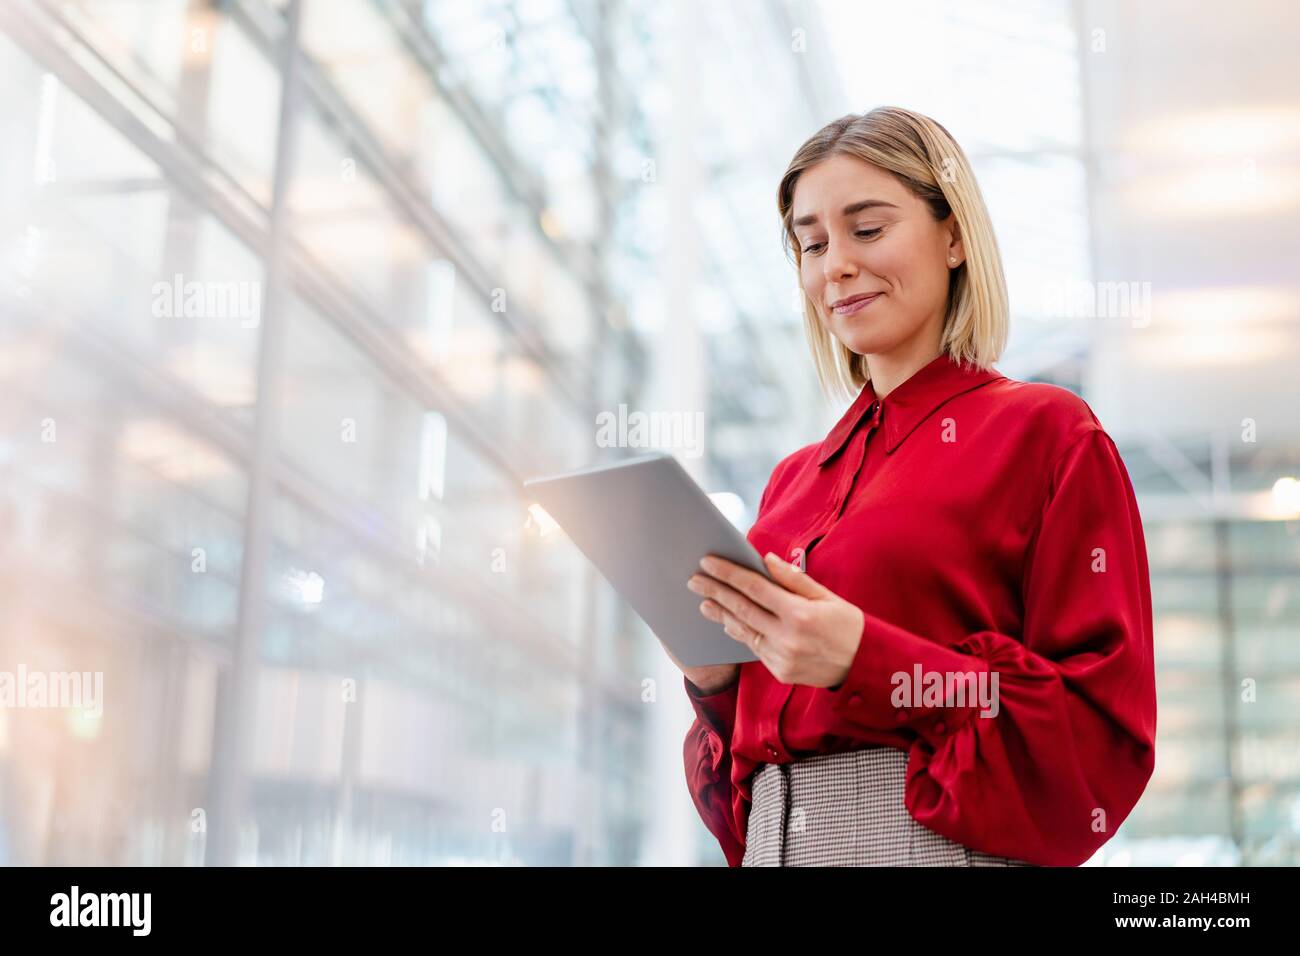 Young businesswoman wearing red shirt using tablet Banque D'Images